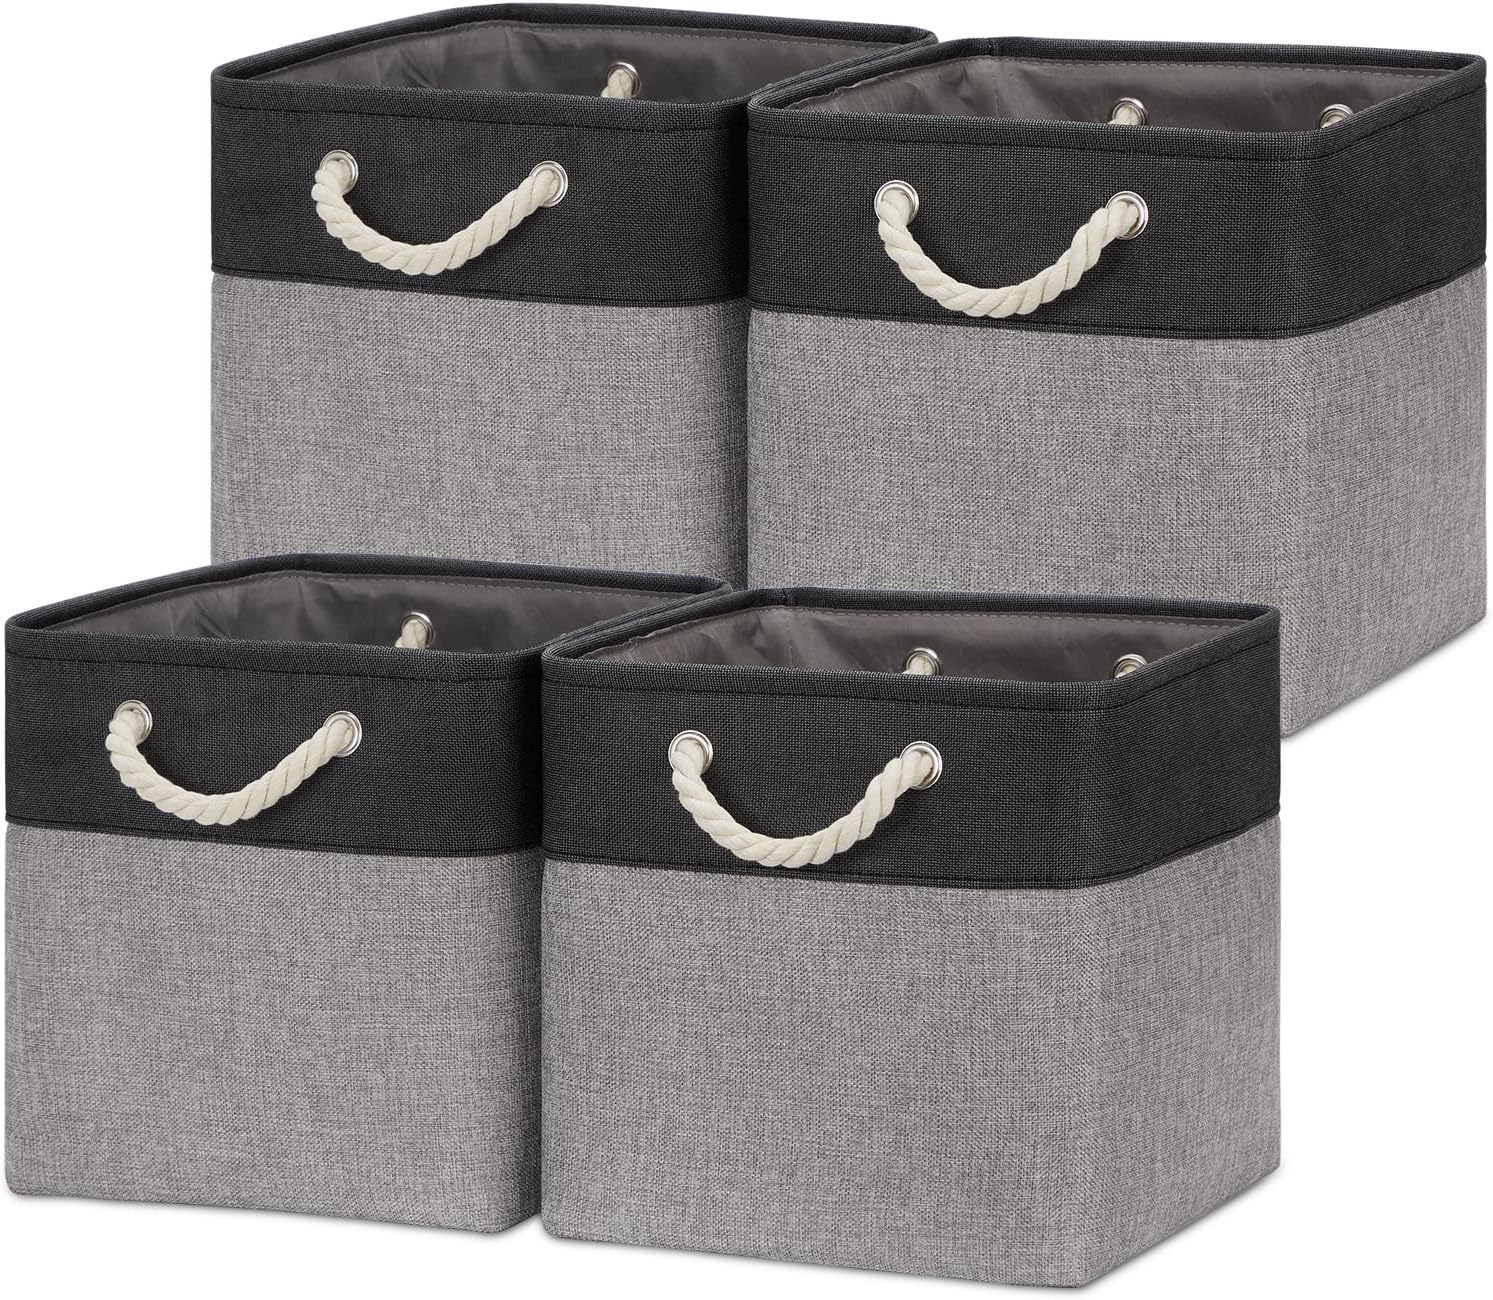 Temary 12 Inch Cube Storage Baskets 4 Pack Fabric Storage Bin for Toys, Large Baskets with Handles, Basket for Organizing Towels, Blankets, Collapsible Cube Storage Bins (Black&Gray)